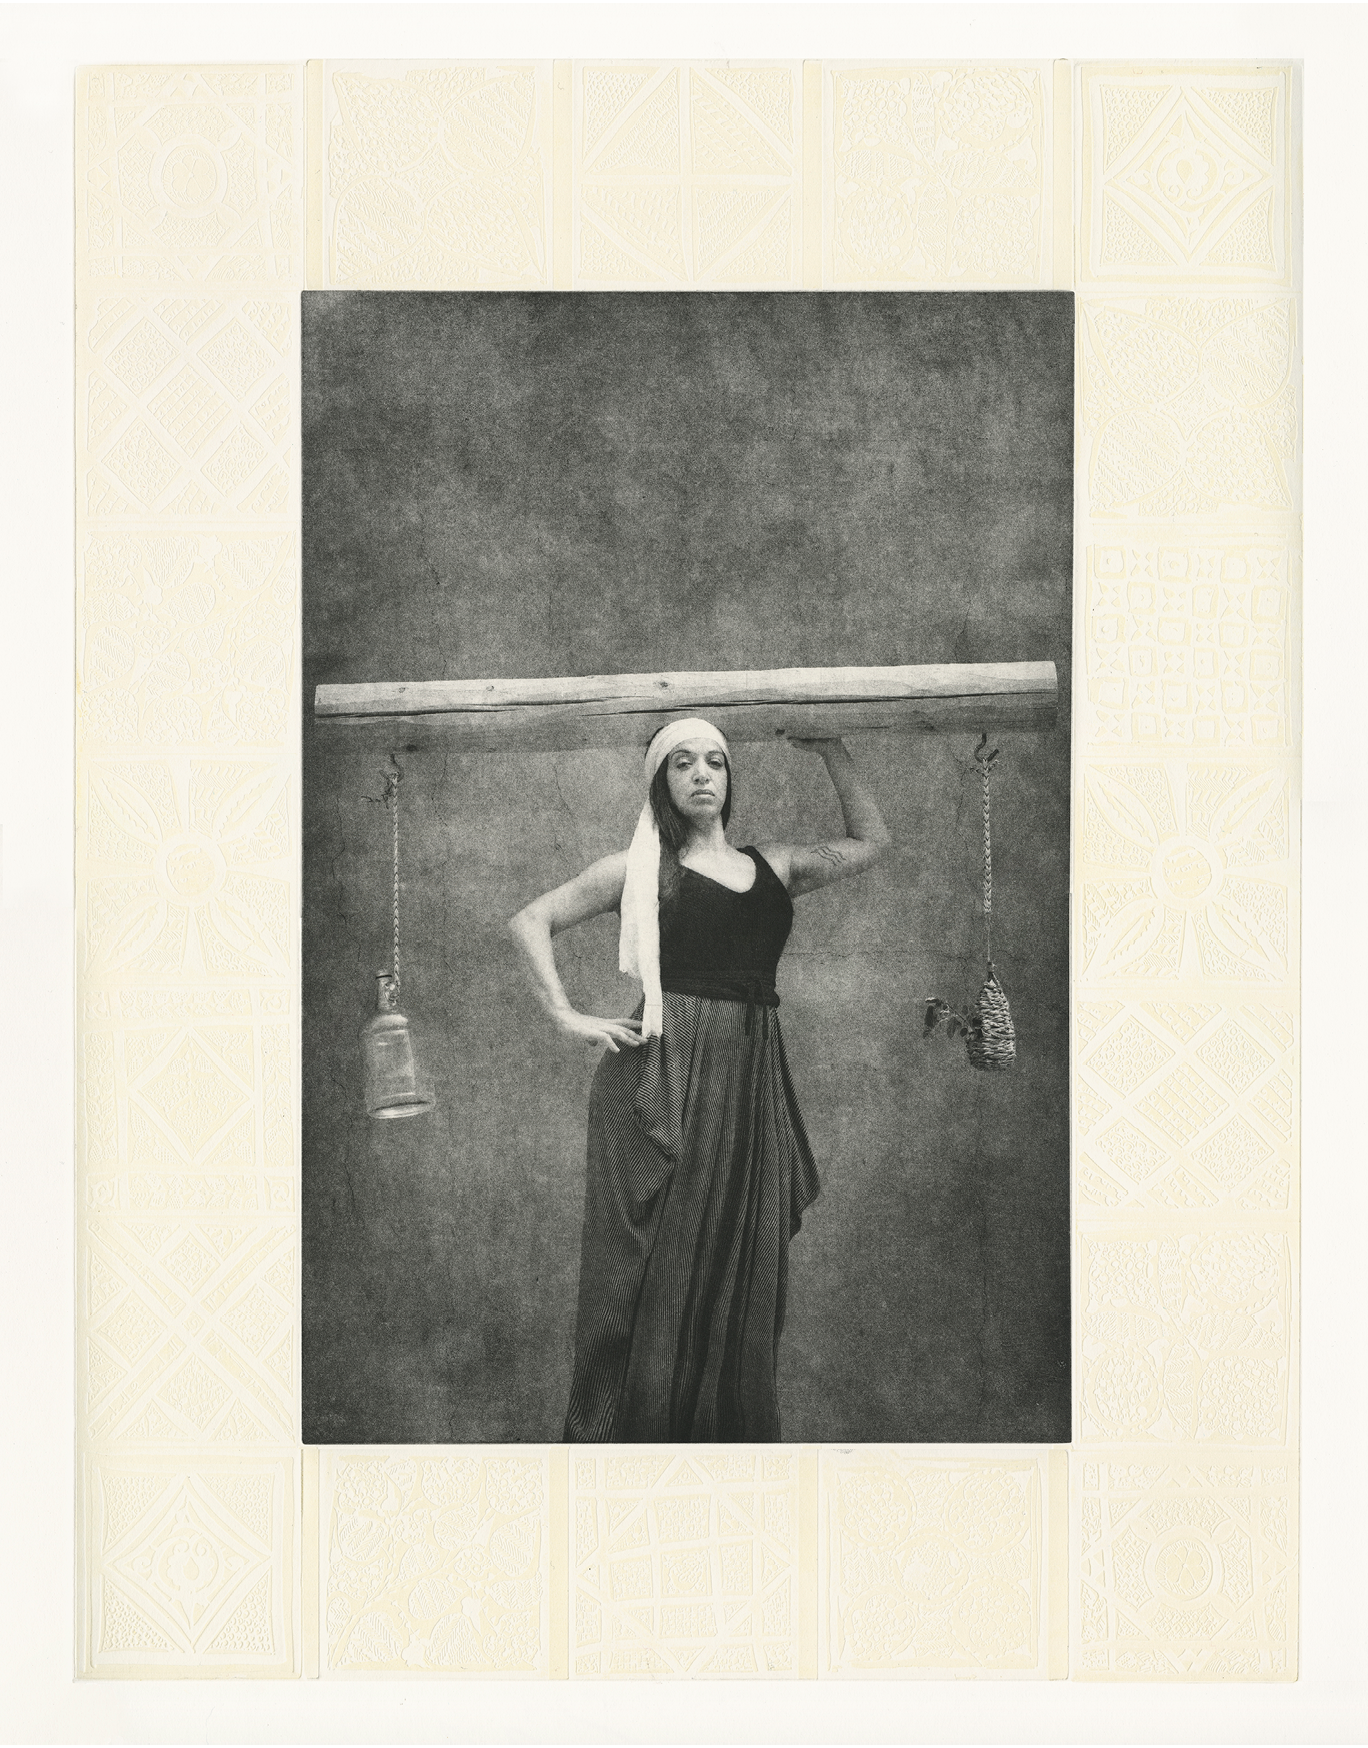 Black and white photographic portrait of a woman, standing with one hand on her hip, and the other hand holding up an electricity pole across her head. The pole appears to be a scale. On one side, a plant hangs from a jute rope, on the other side, an empty glass jug hangs from a rope. The image is framed with an embossed decorative design.